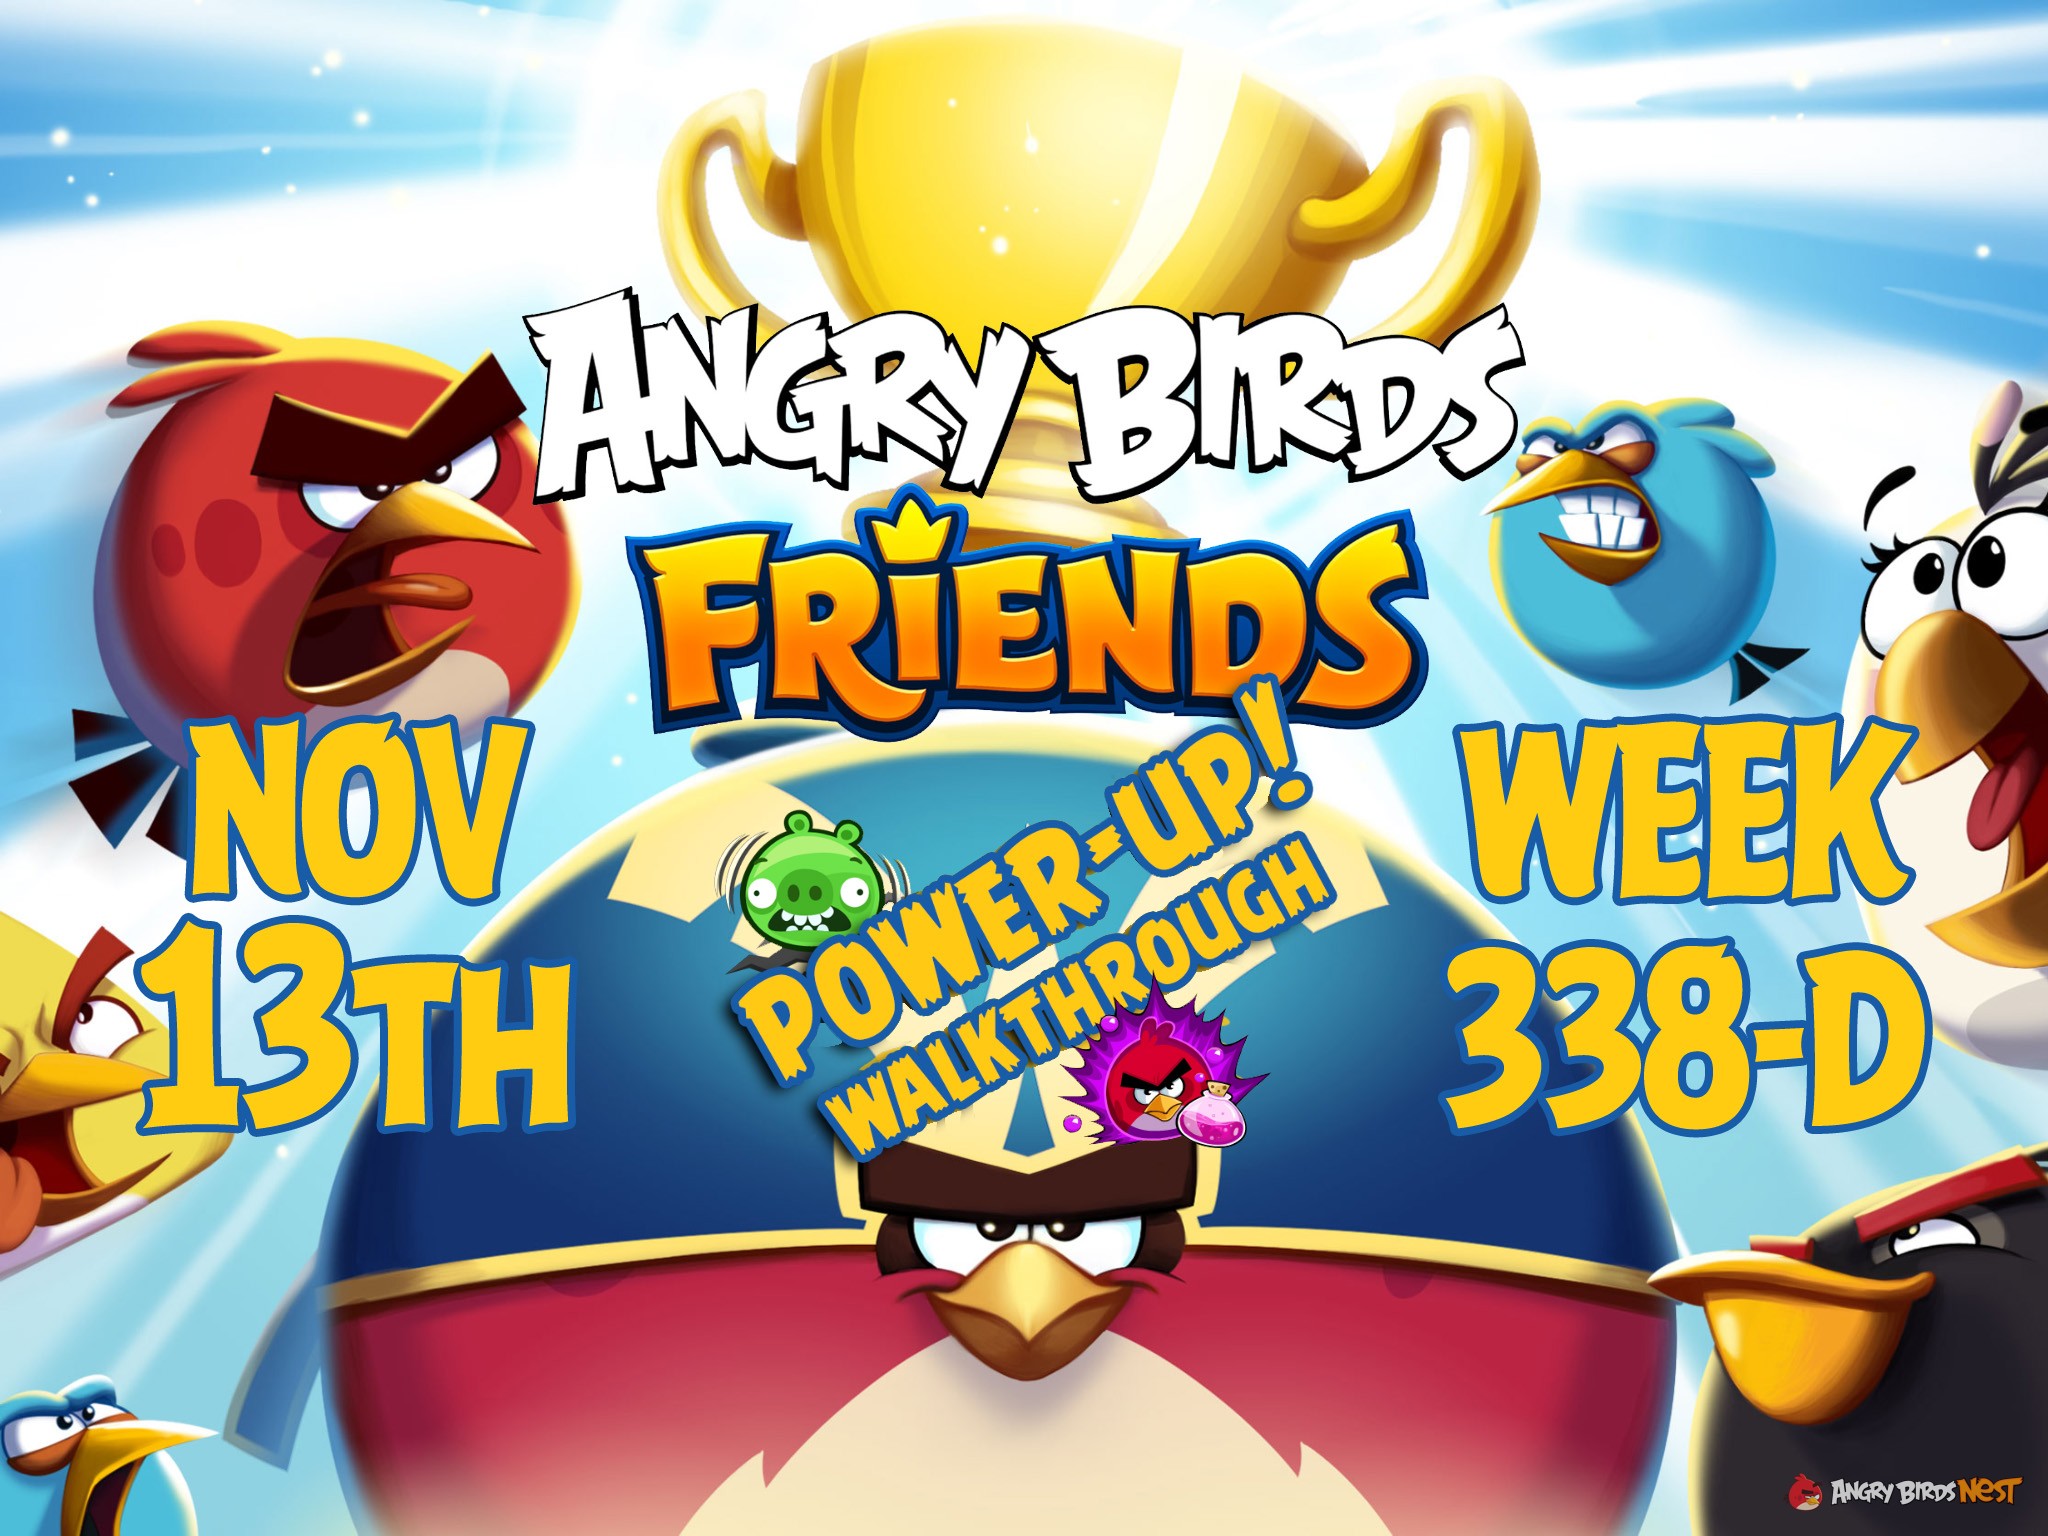 Angry-Birds-Friends-Tournament-Week-338-D-Feature-Image-PU